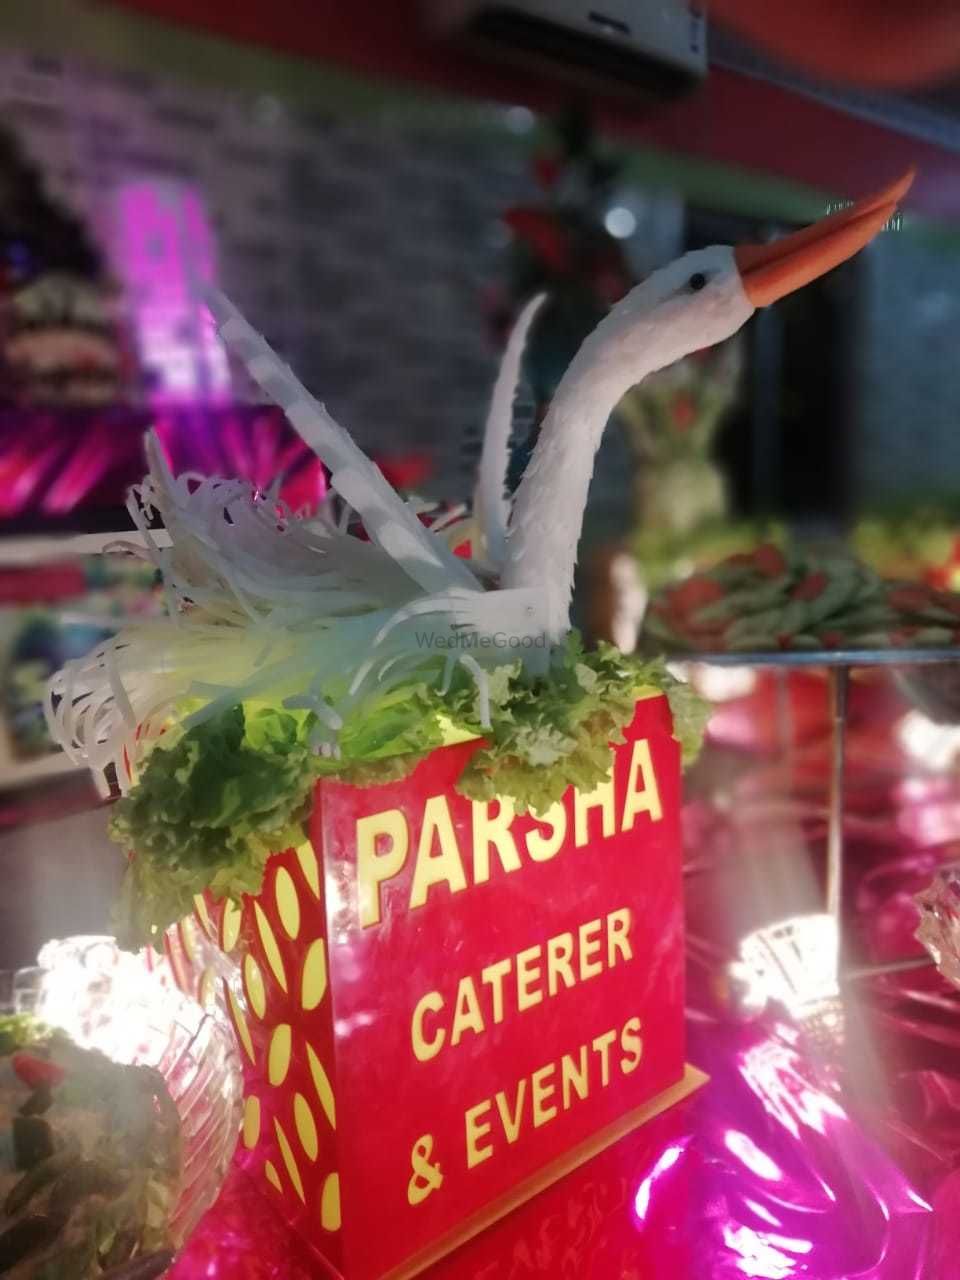 Photo By Parsha Caterer & Events - Catering Services